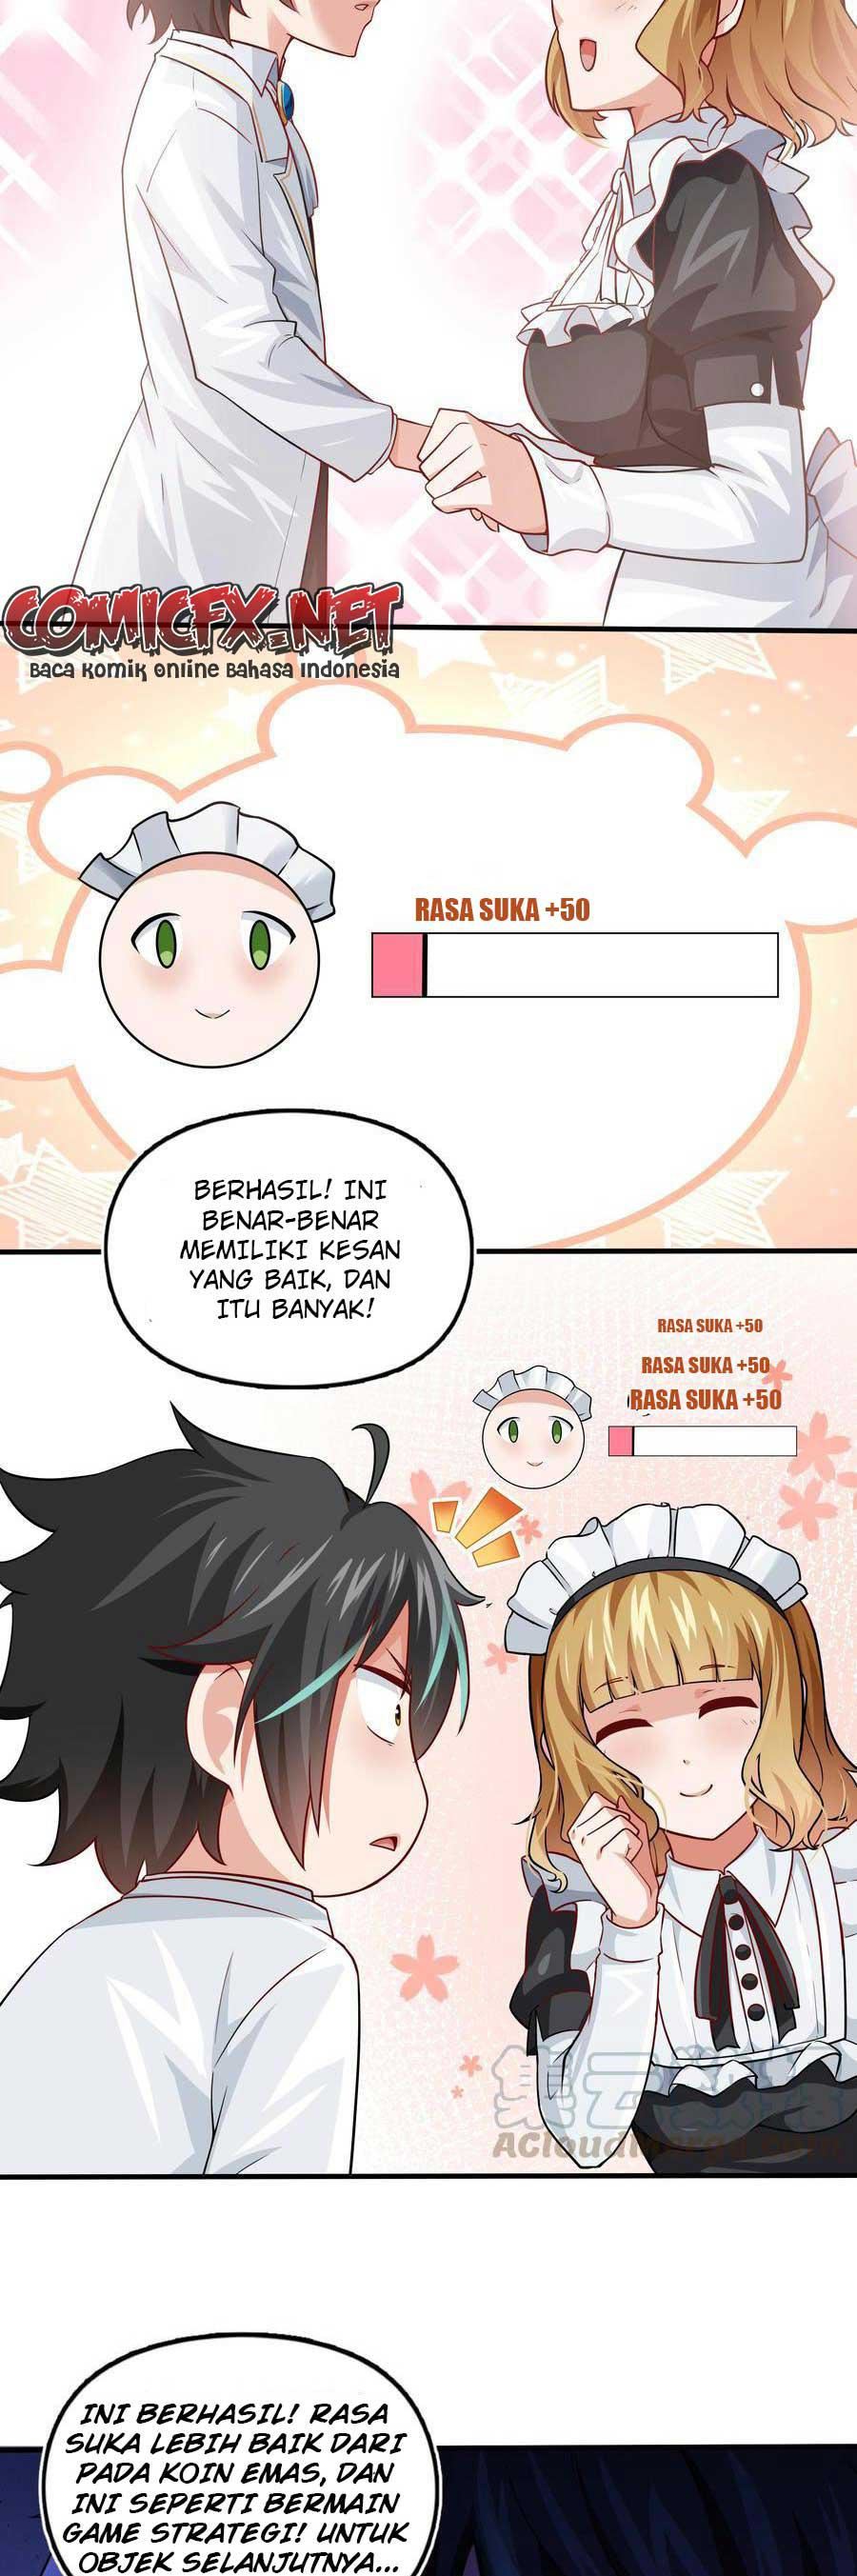 Dilarang COPAS - situs resmi www.mangacanblog.com - Komik little tyrant doesnt want to meet with a bad end 001 - chapter 1 2 Indonesia little tyrant doesnt want to meet with a bad end 001 - chapter 1 Terbaru 20|Baca Manga Komik Indonesia|Mangacan